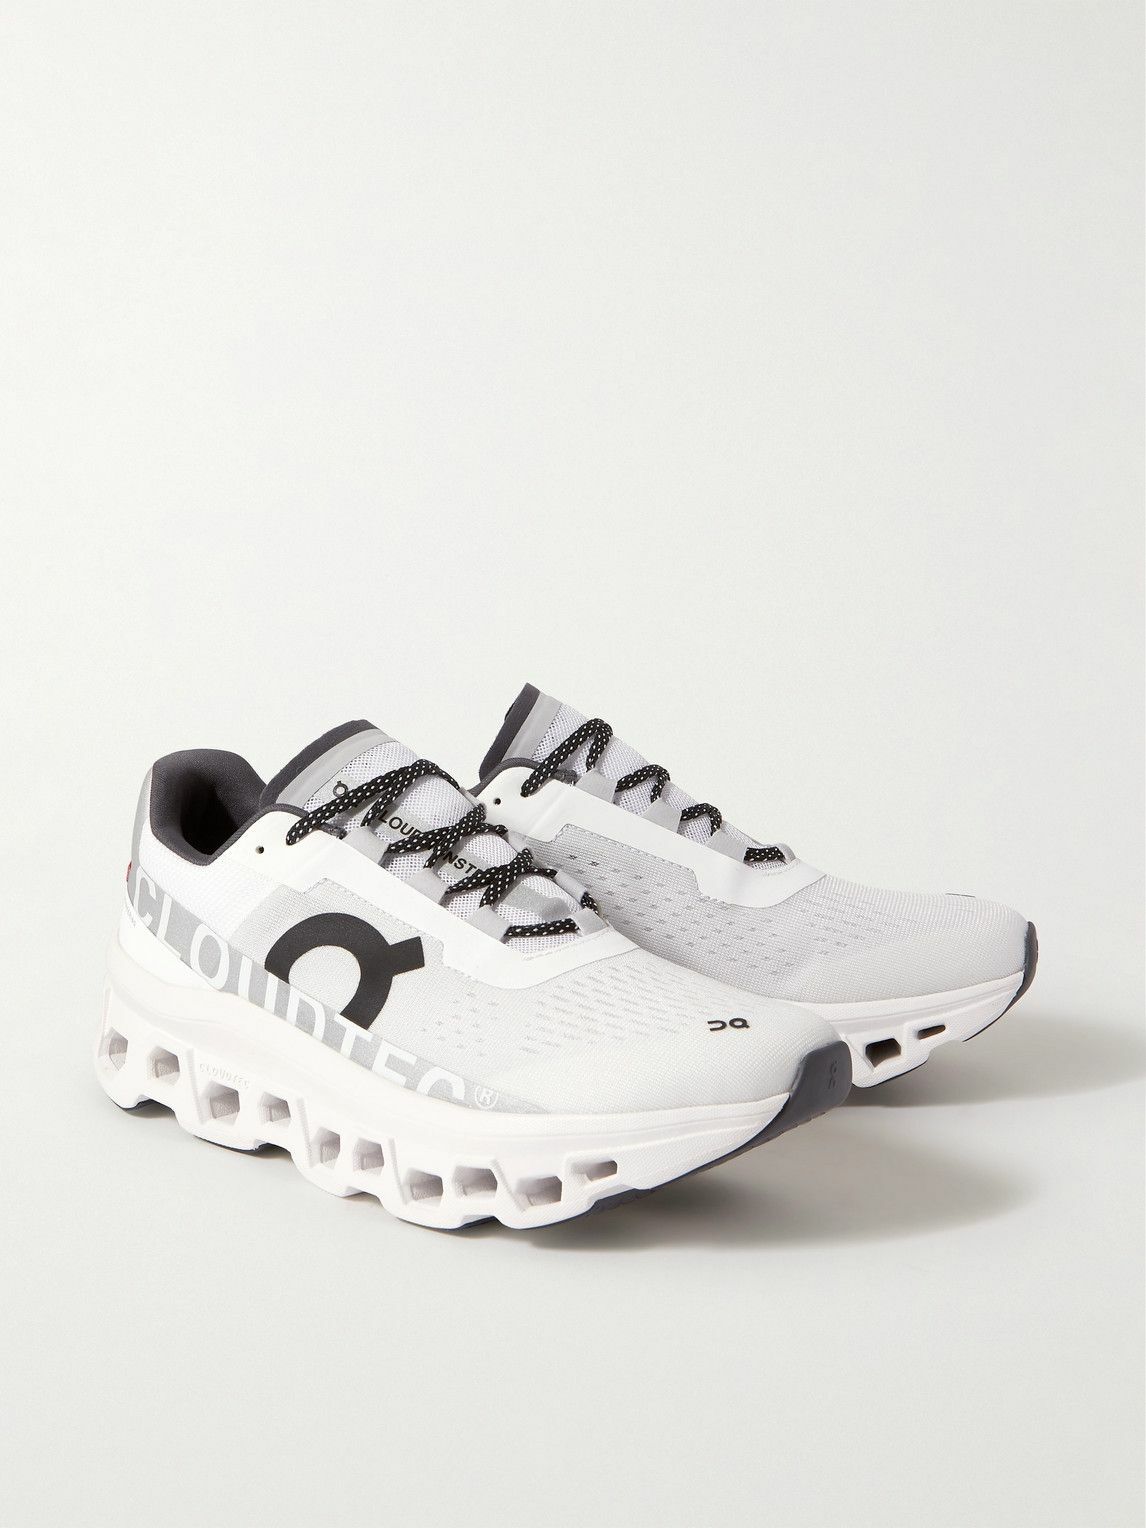 ON - Cloudmonster Rubber-Trimmed Mesh Running Sneakers - White Onia